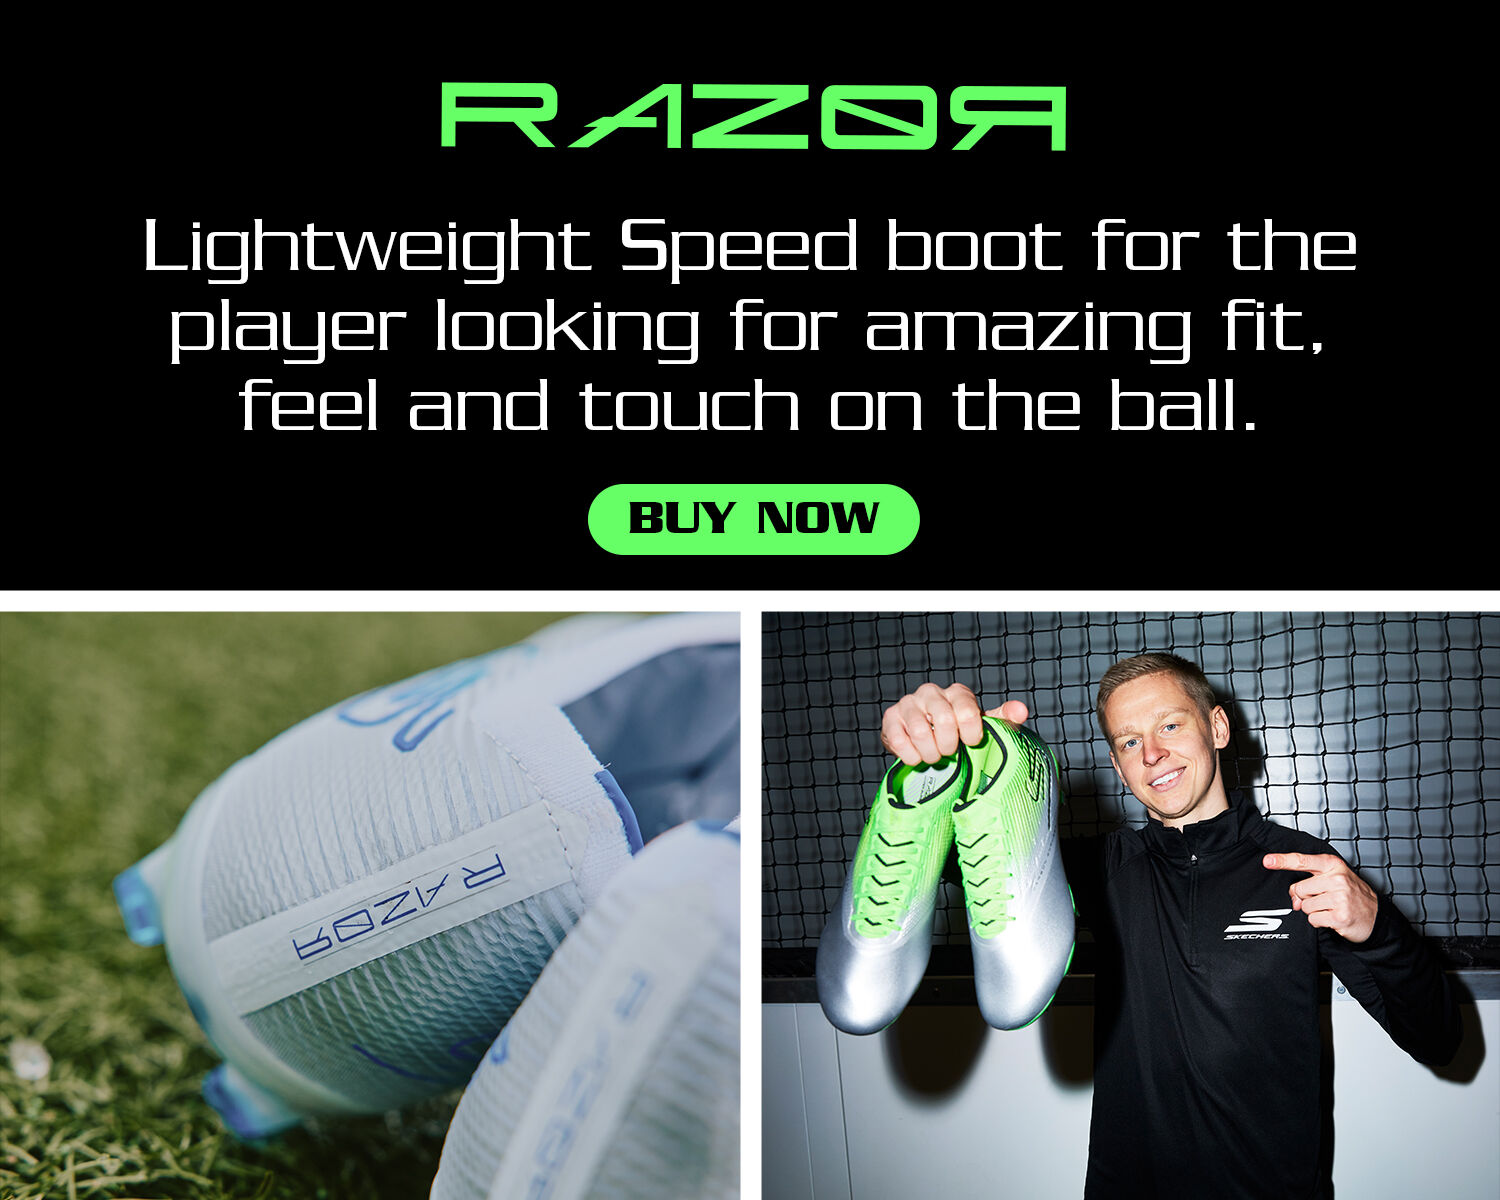 Razor. Lightweight speed boot for the player looking for amazing fit, feel and touch on the ball.